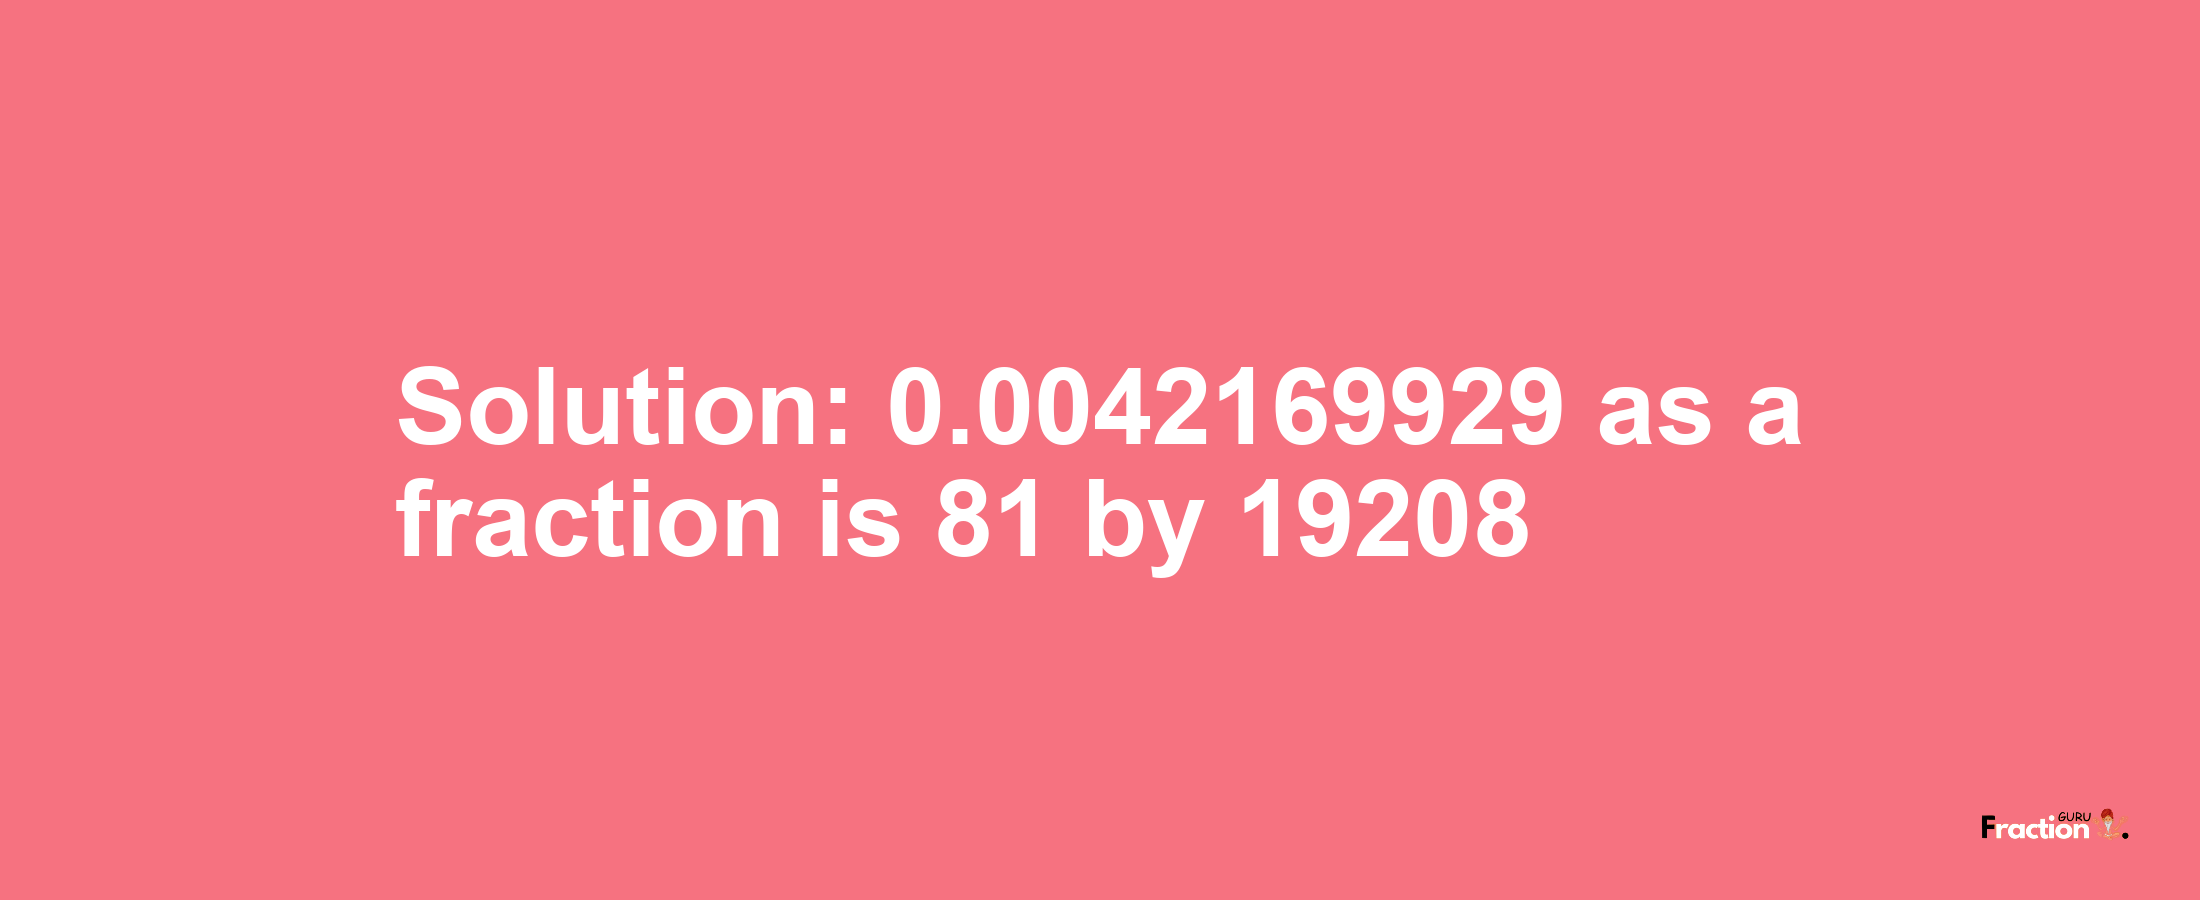 Solution:0.0042169929 as a fraction is 81/19208